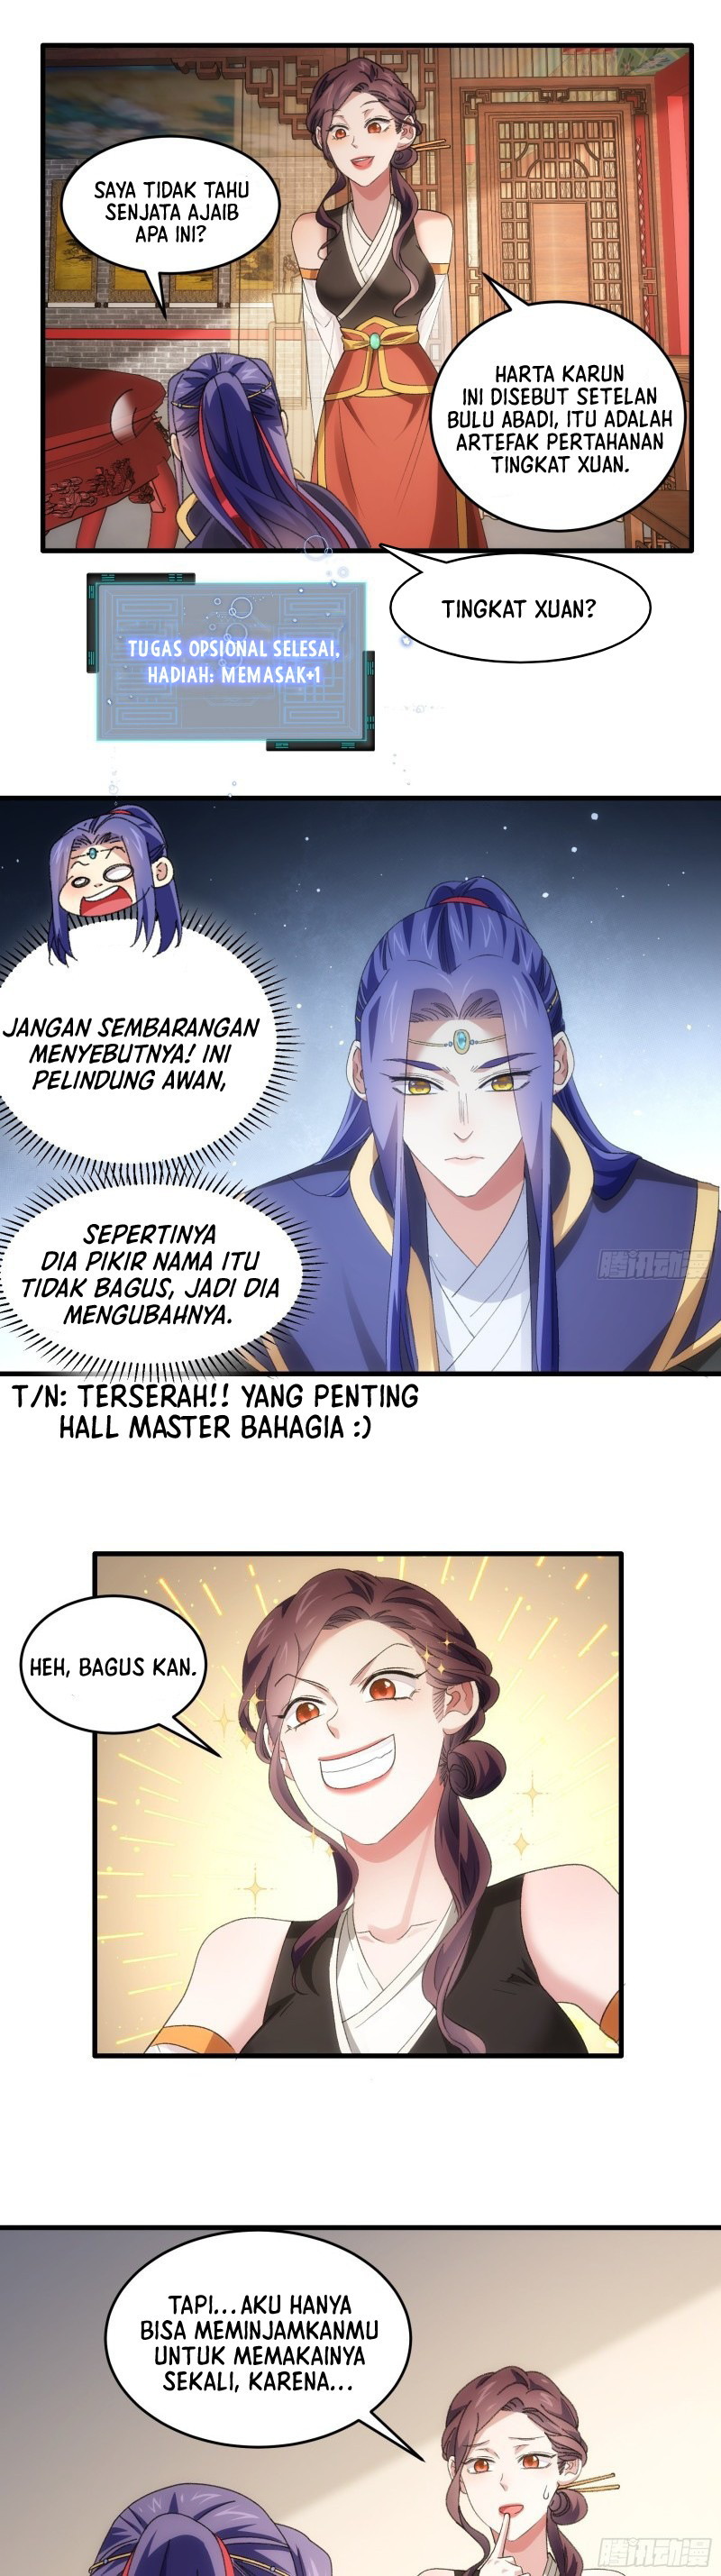 Dilarang COPAS - situs resmi www.mangacanblog.com - Komik i just dont play the card according to the routine 052 - chapter 52 53 Indonesia i just dont play the card according to the routine 052 - chapter 52 Terbaru 10|Baca Manga Komik Indonesia|Mangacan